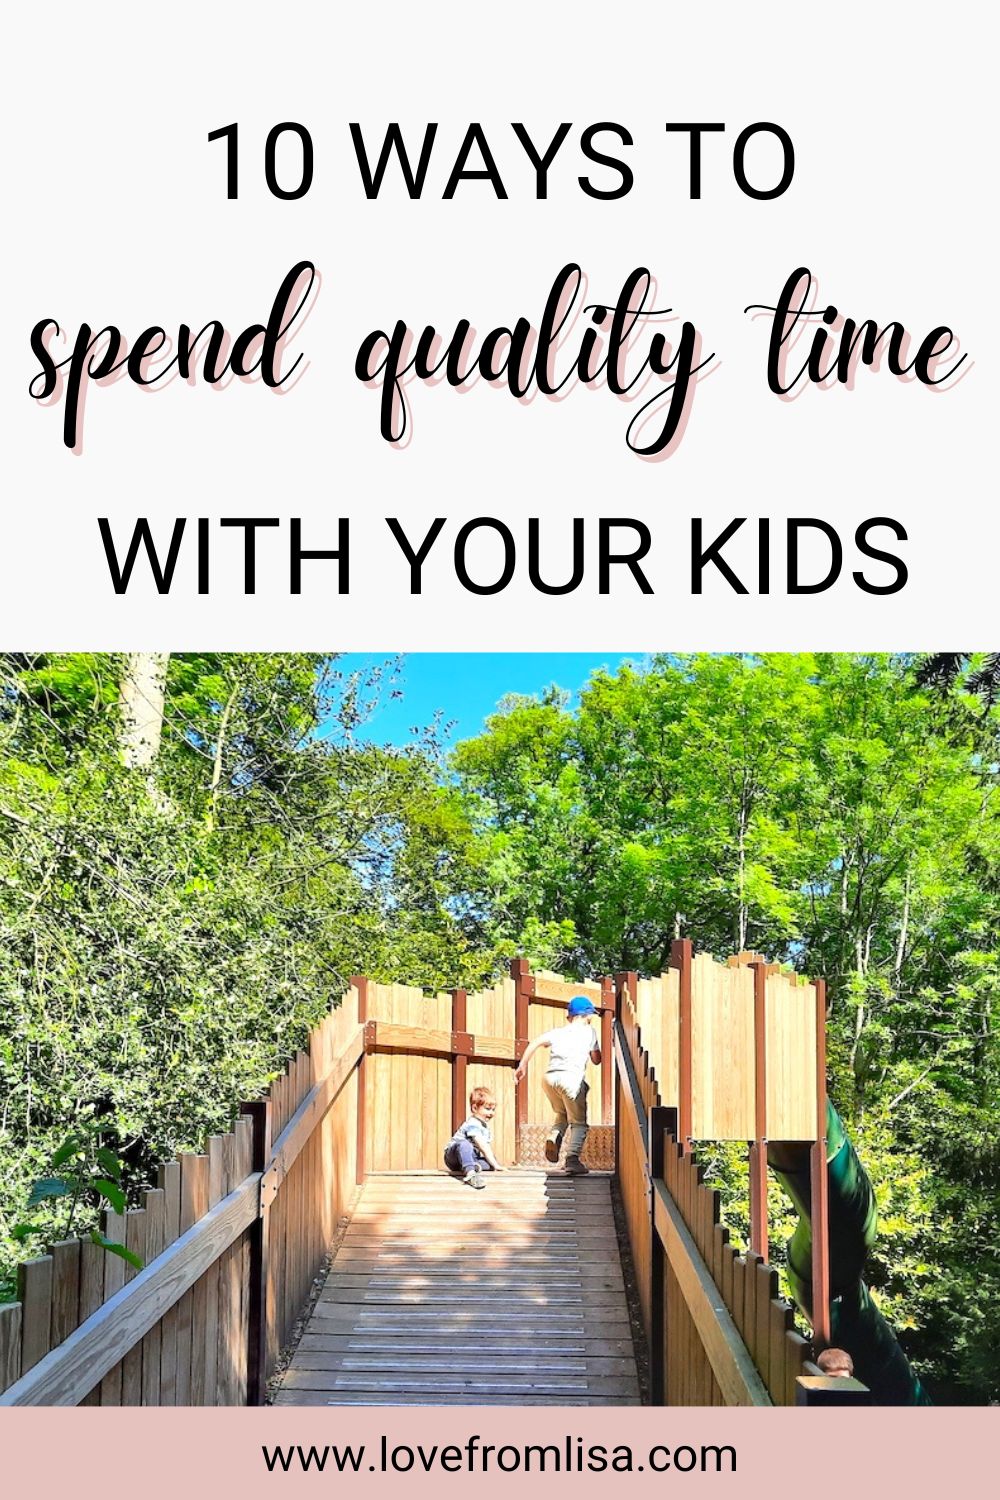 10 ways to spend quality time with your kids